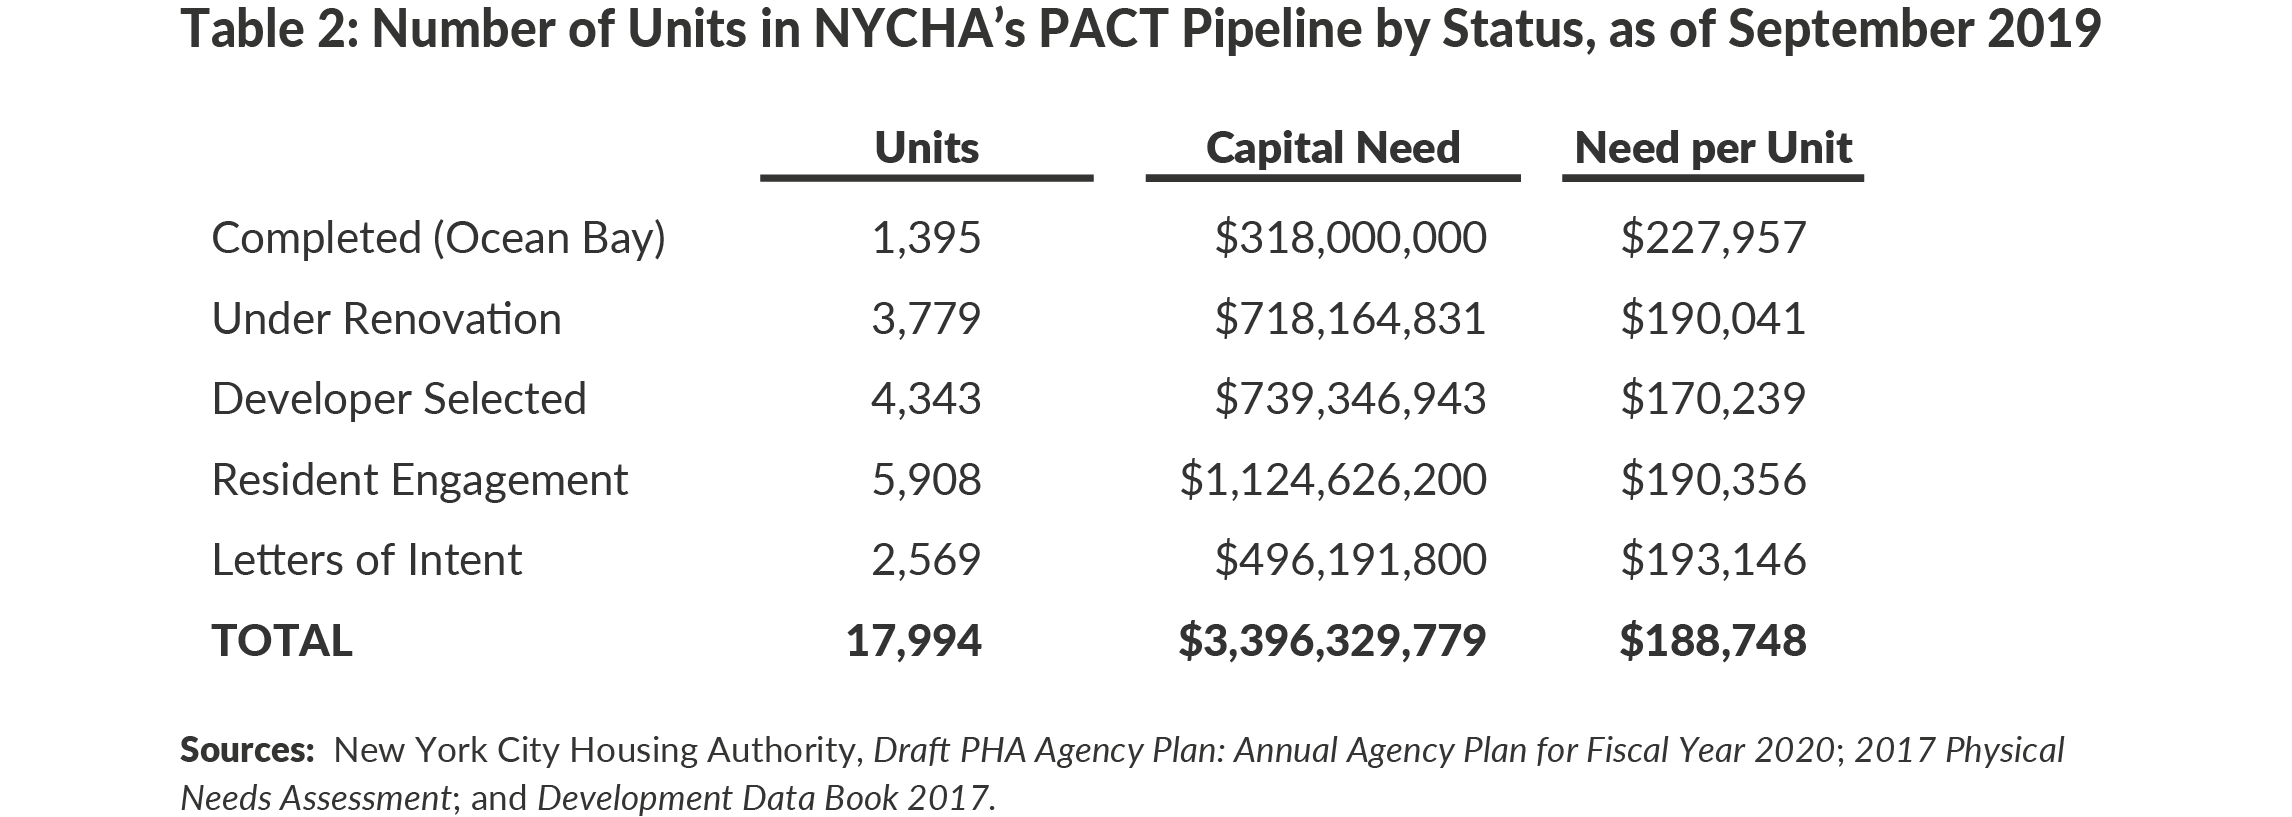 Table 2: Number of Units in NYCHA’s PACT Pipeline by Status, as of September 2019